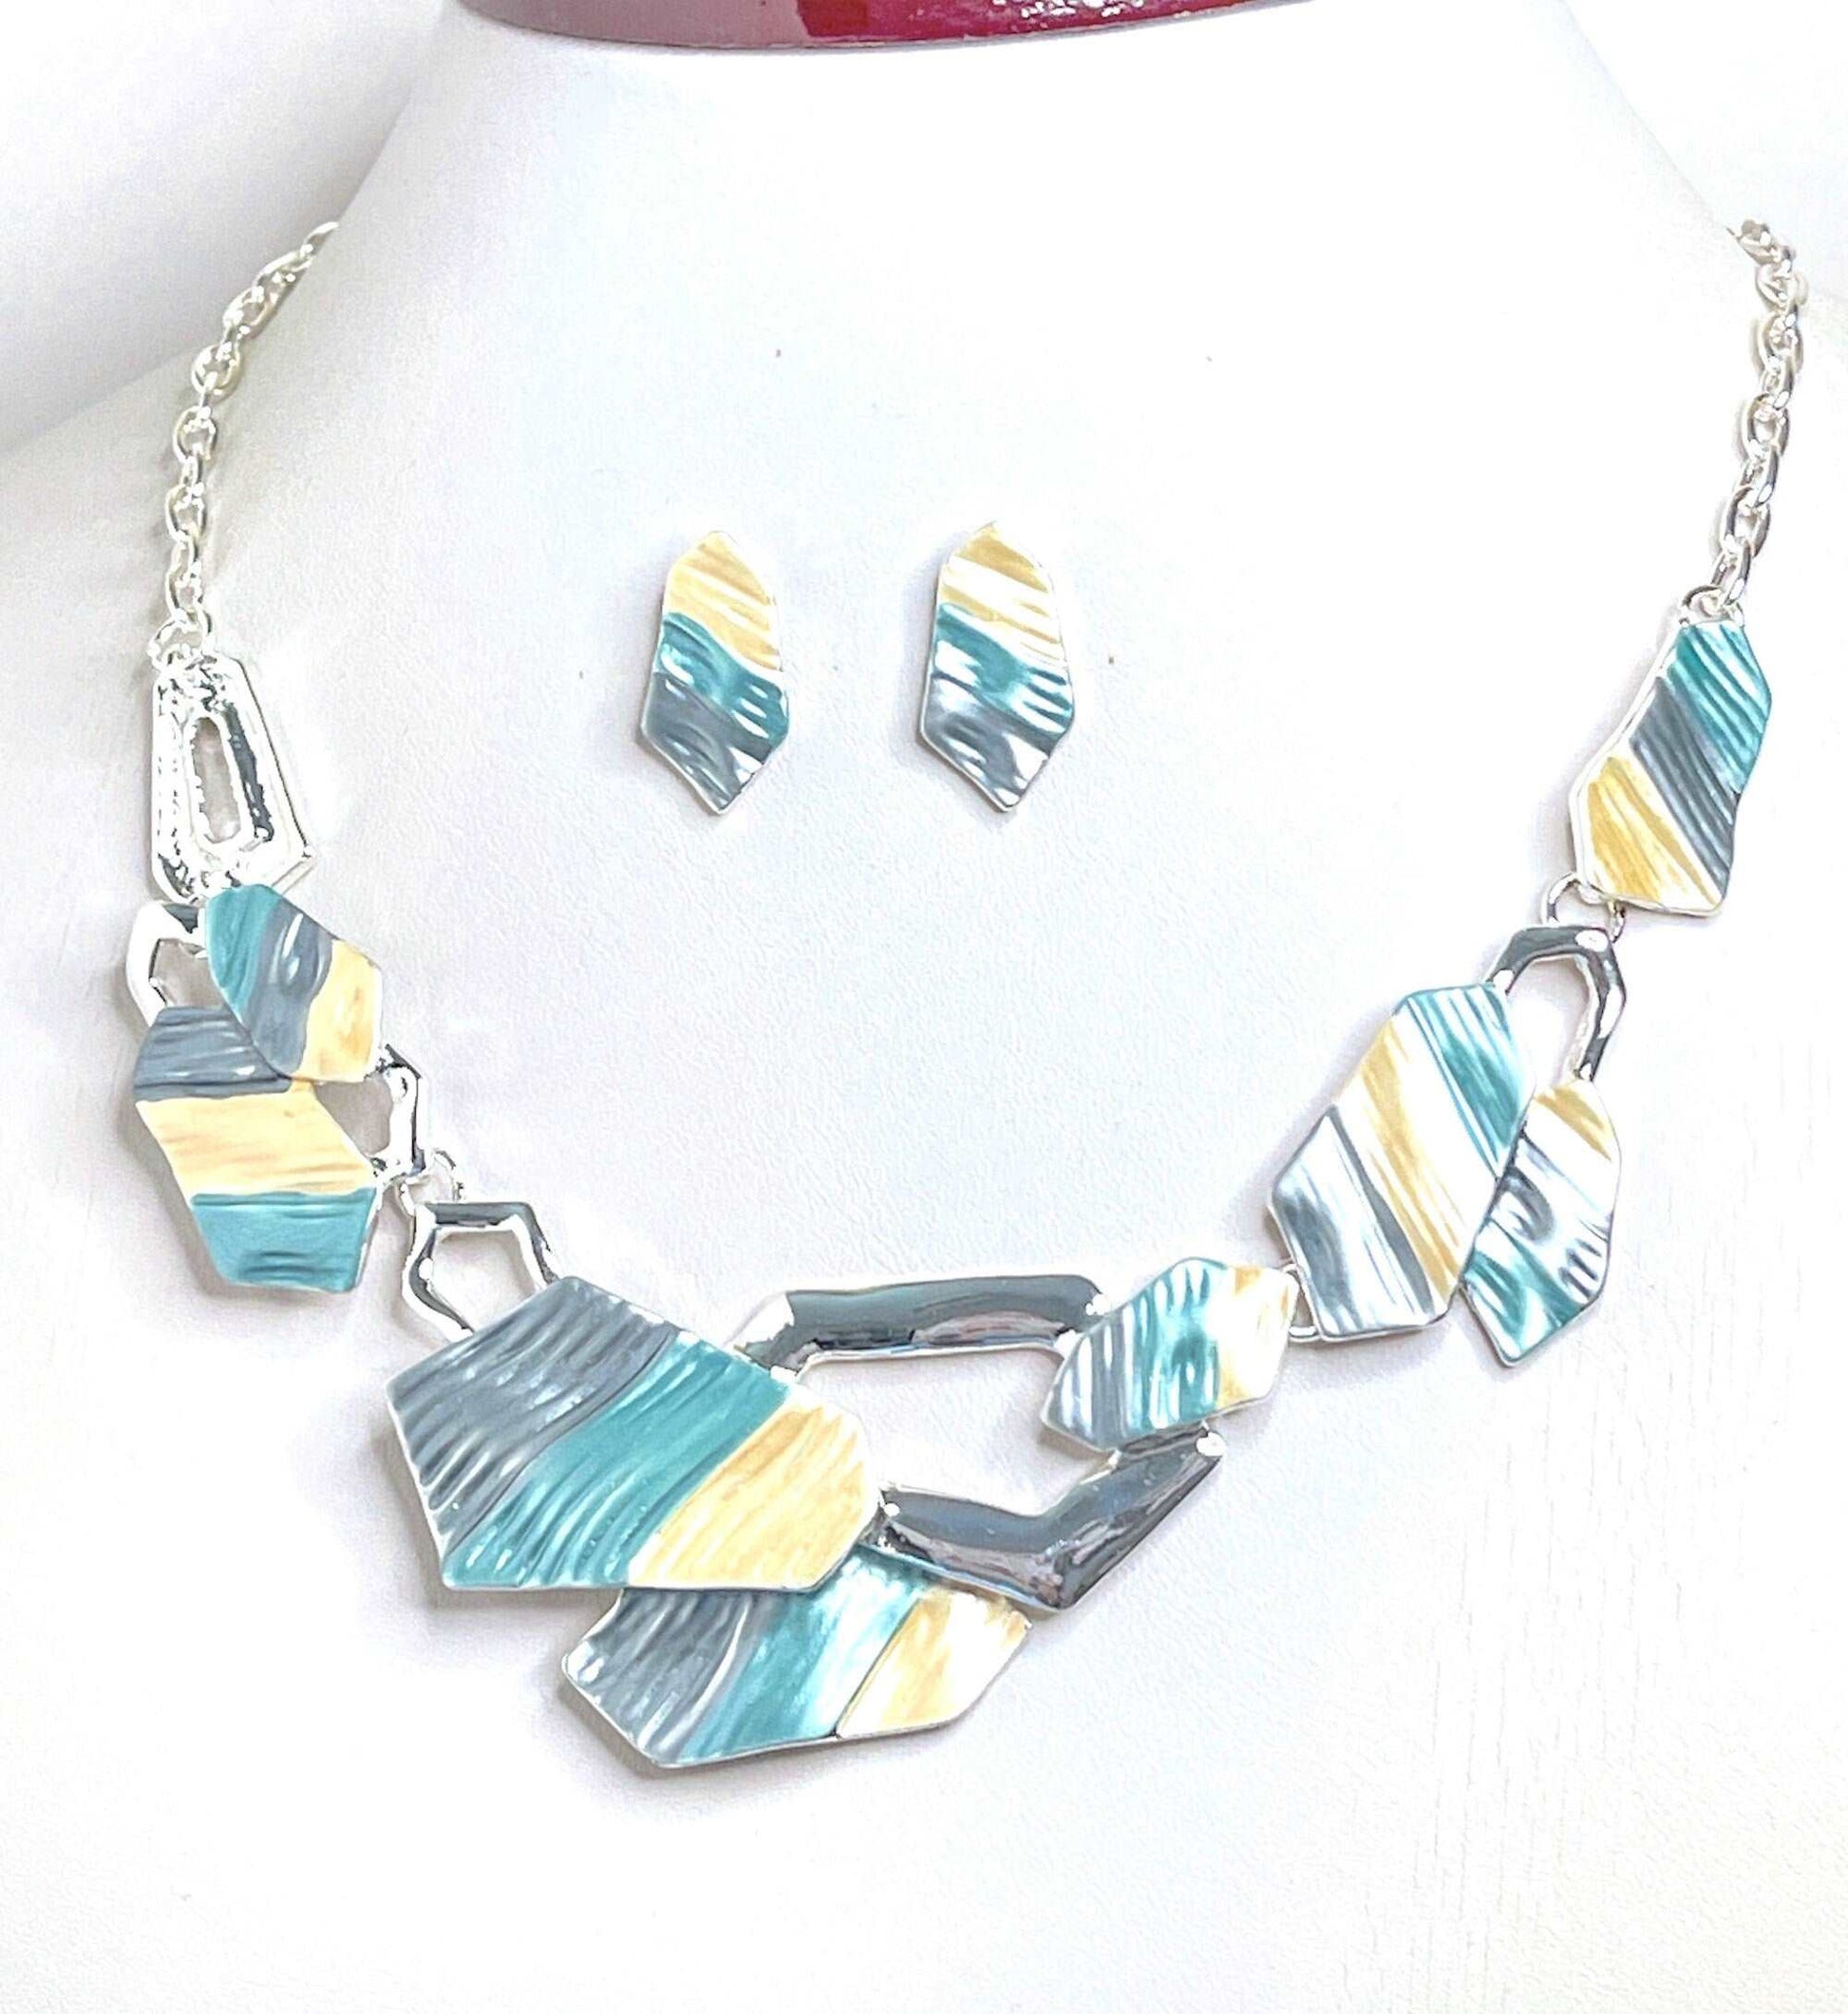 Blue Yellow Silver Geometric Necklace with Earrings Set, Modern Style Jewellery, Pastel Enamel Jewelry, Necklaces for Women